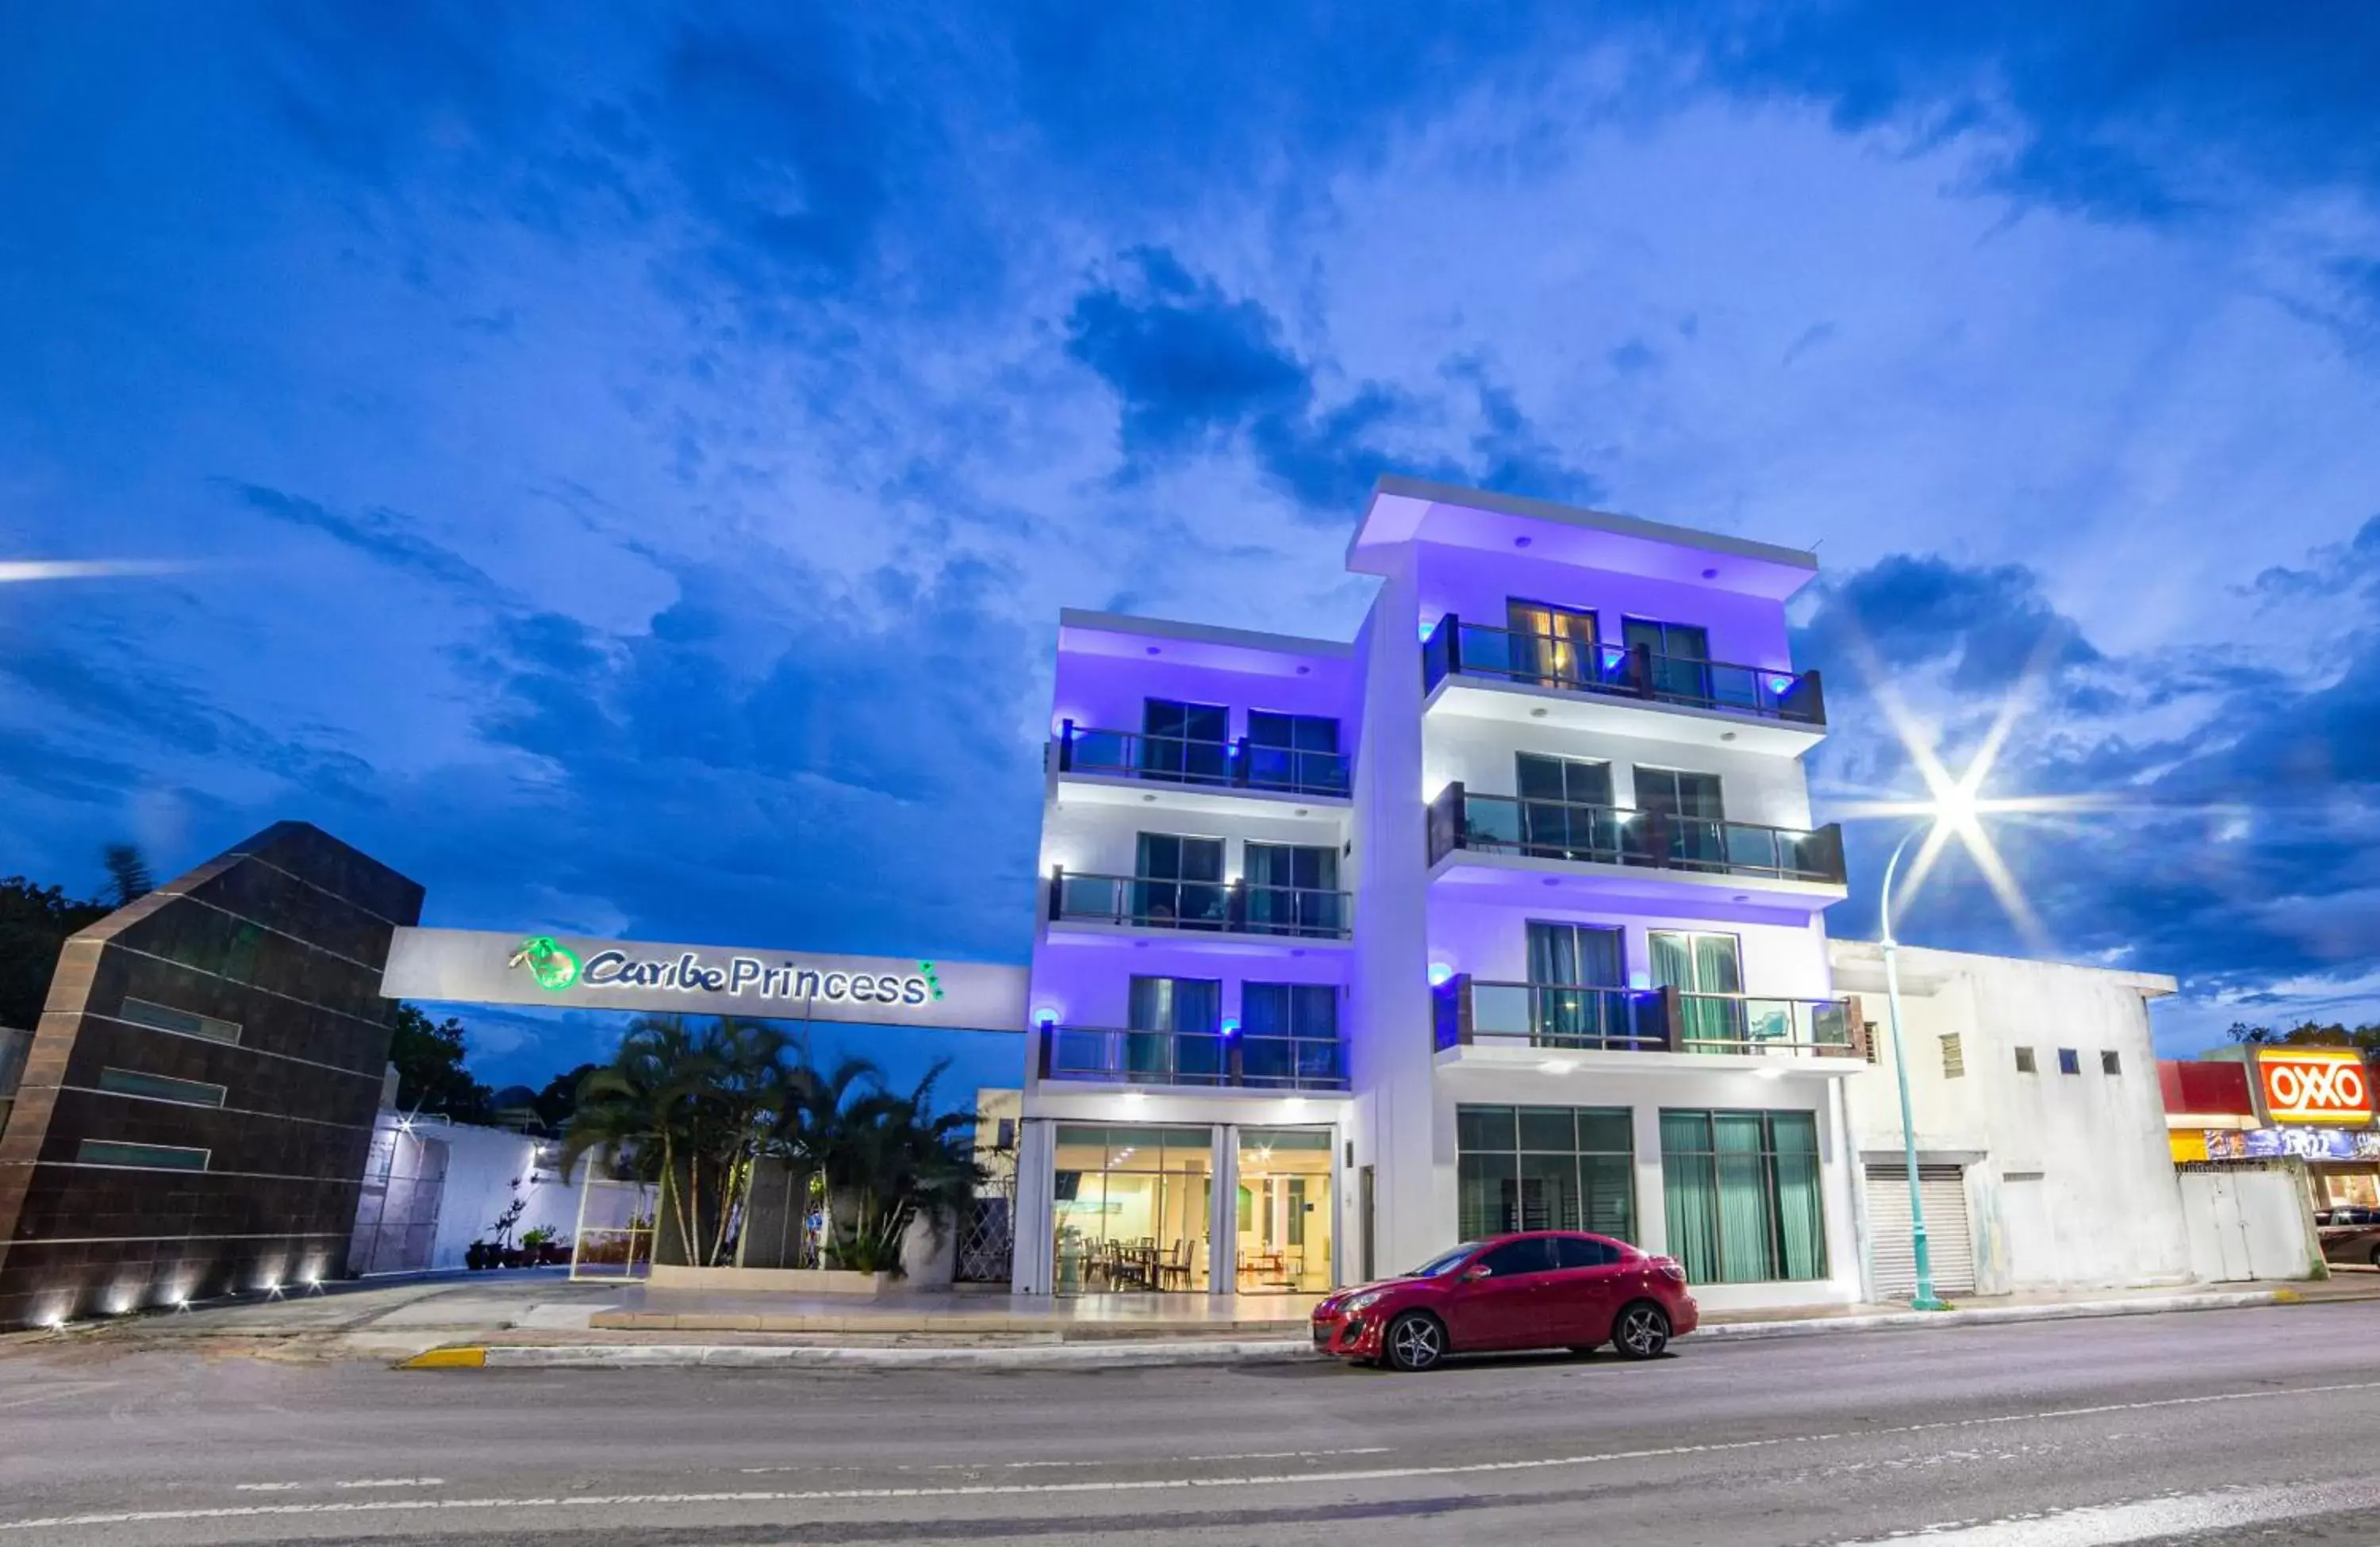 Property Building in Caribe Princess